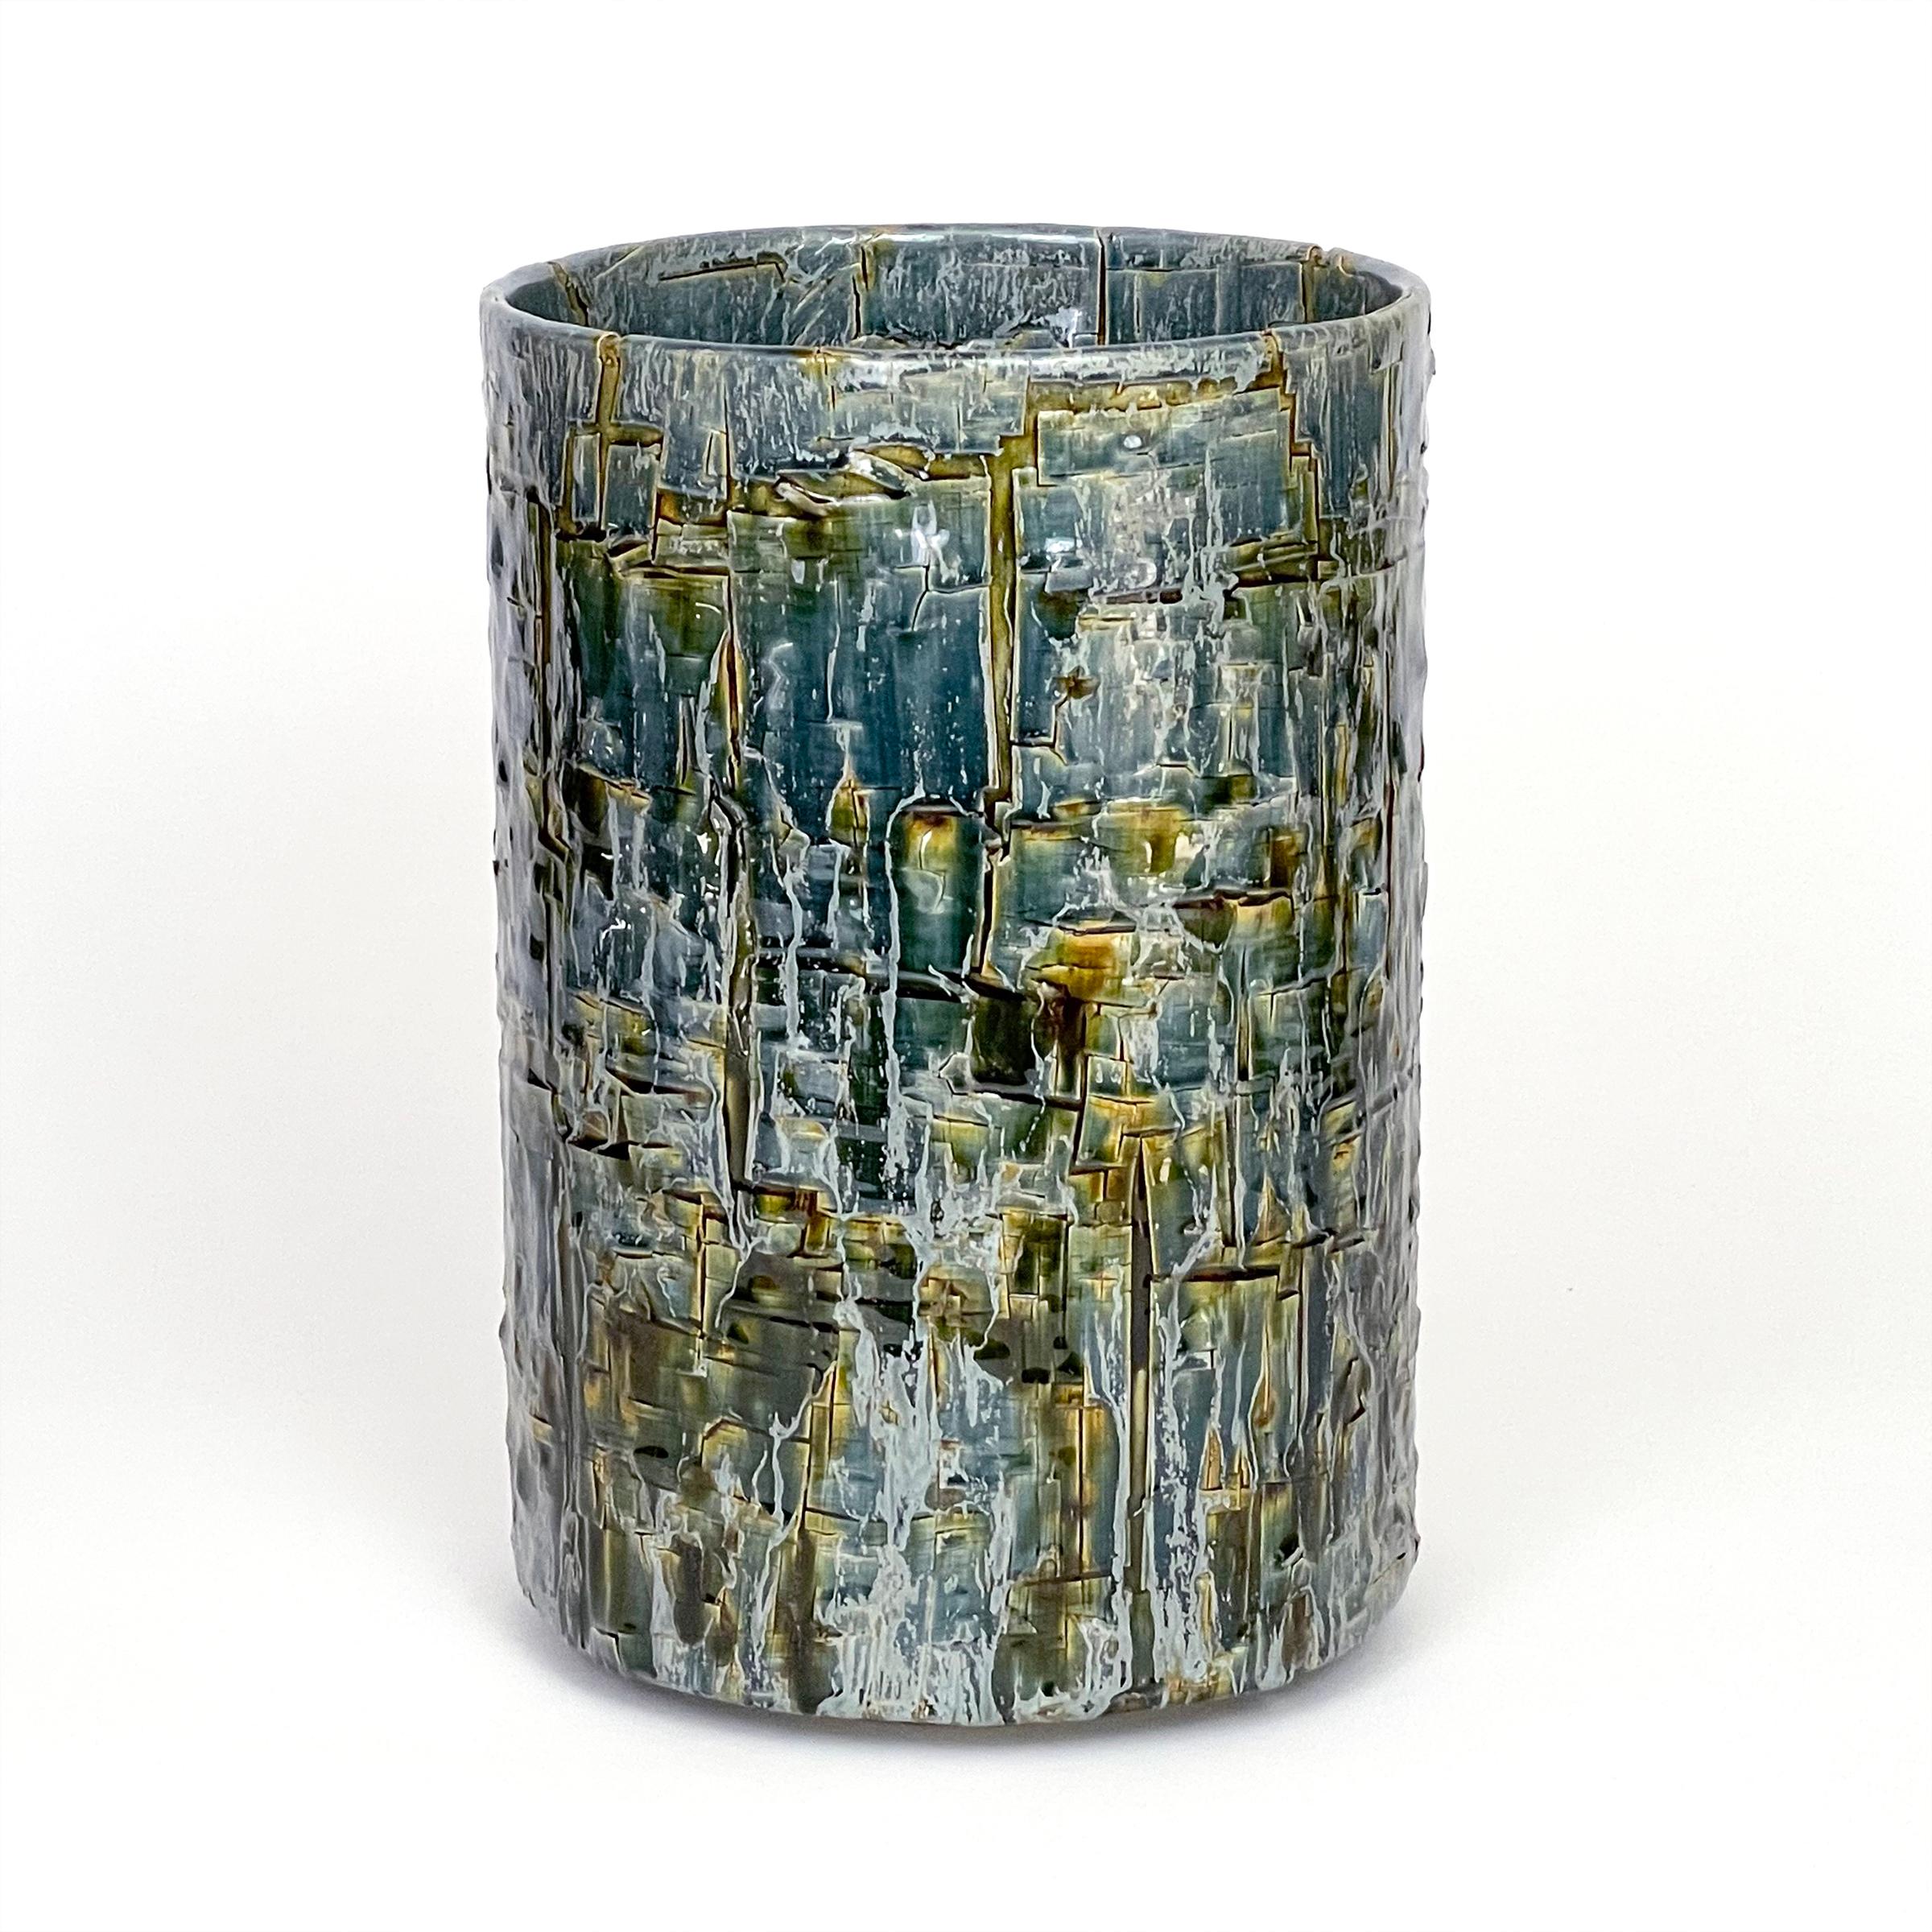 Glazed ceramic cylindrical sculpture by William Edwards
Hand built earthenware decorative vessel, fired multiple times to achieve a textured surface of random abstraction, in hues of blue with amber gloss glaze breaking through.

William received